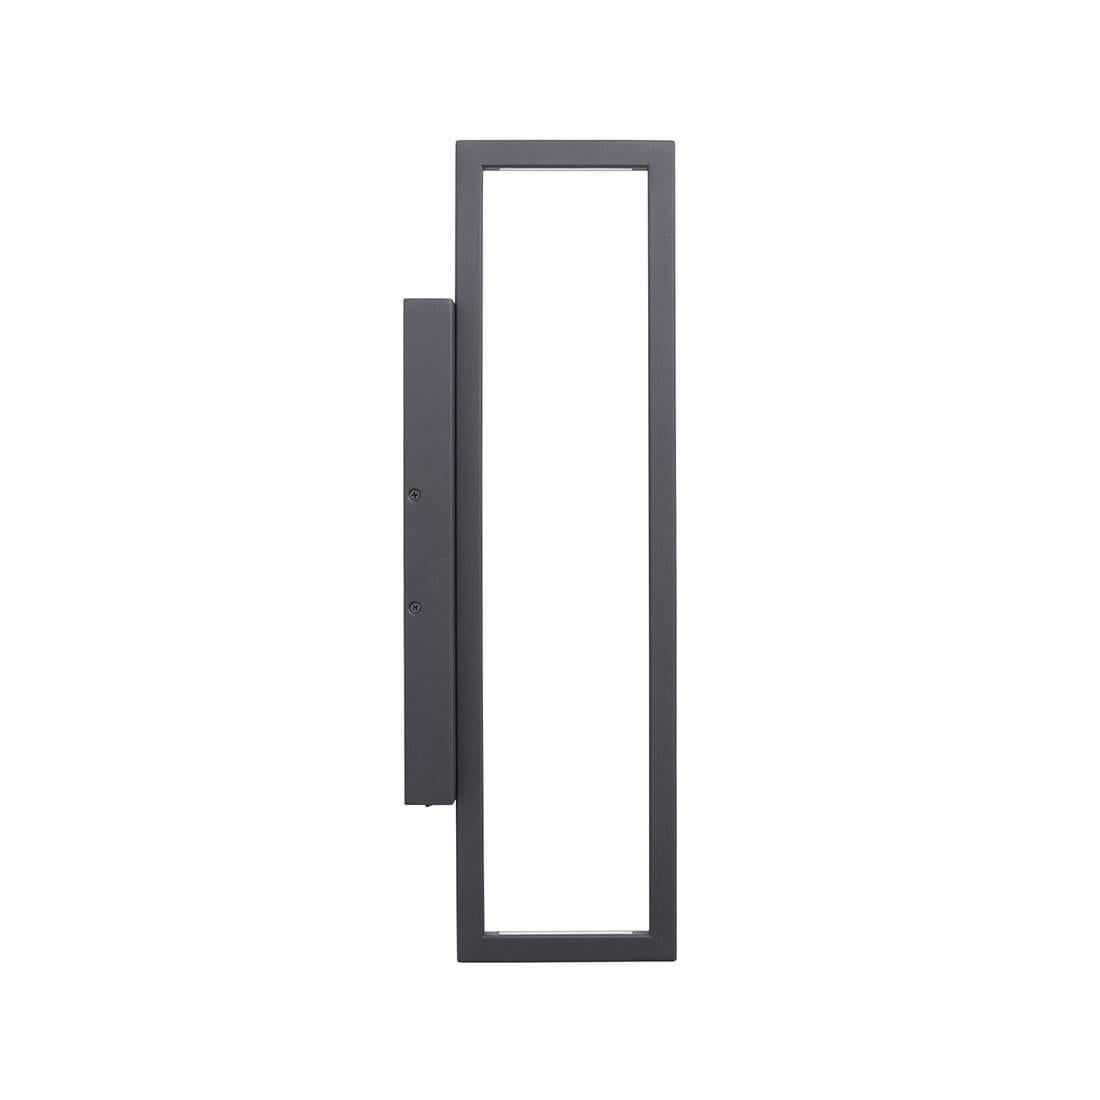 Rectangle wall lamp by Kristina Dam Studio
Materials: Black steel. LED lights.
Dimensions: 6 x 19.5 x H 59cm.

The Modernist furniture collection takes notions of modern design and yet the distinctive design touch of Kristina Dam Studio is